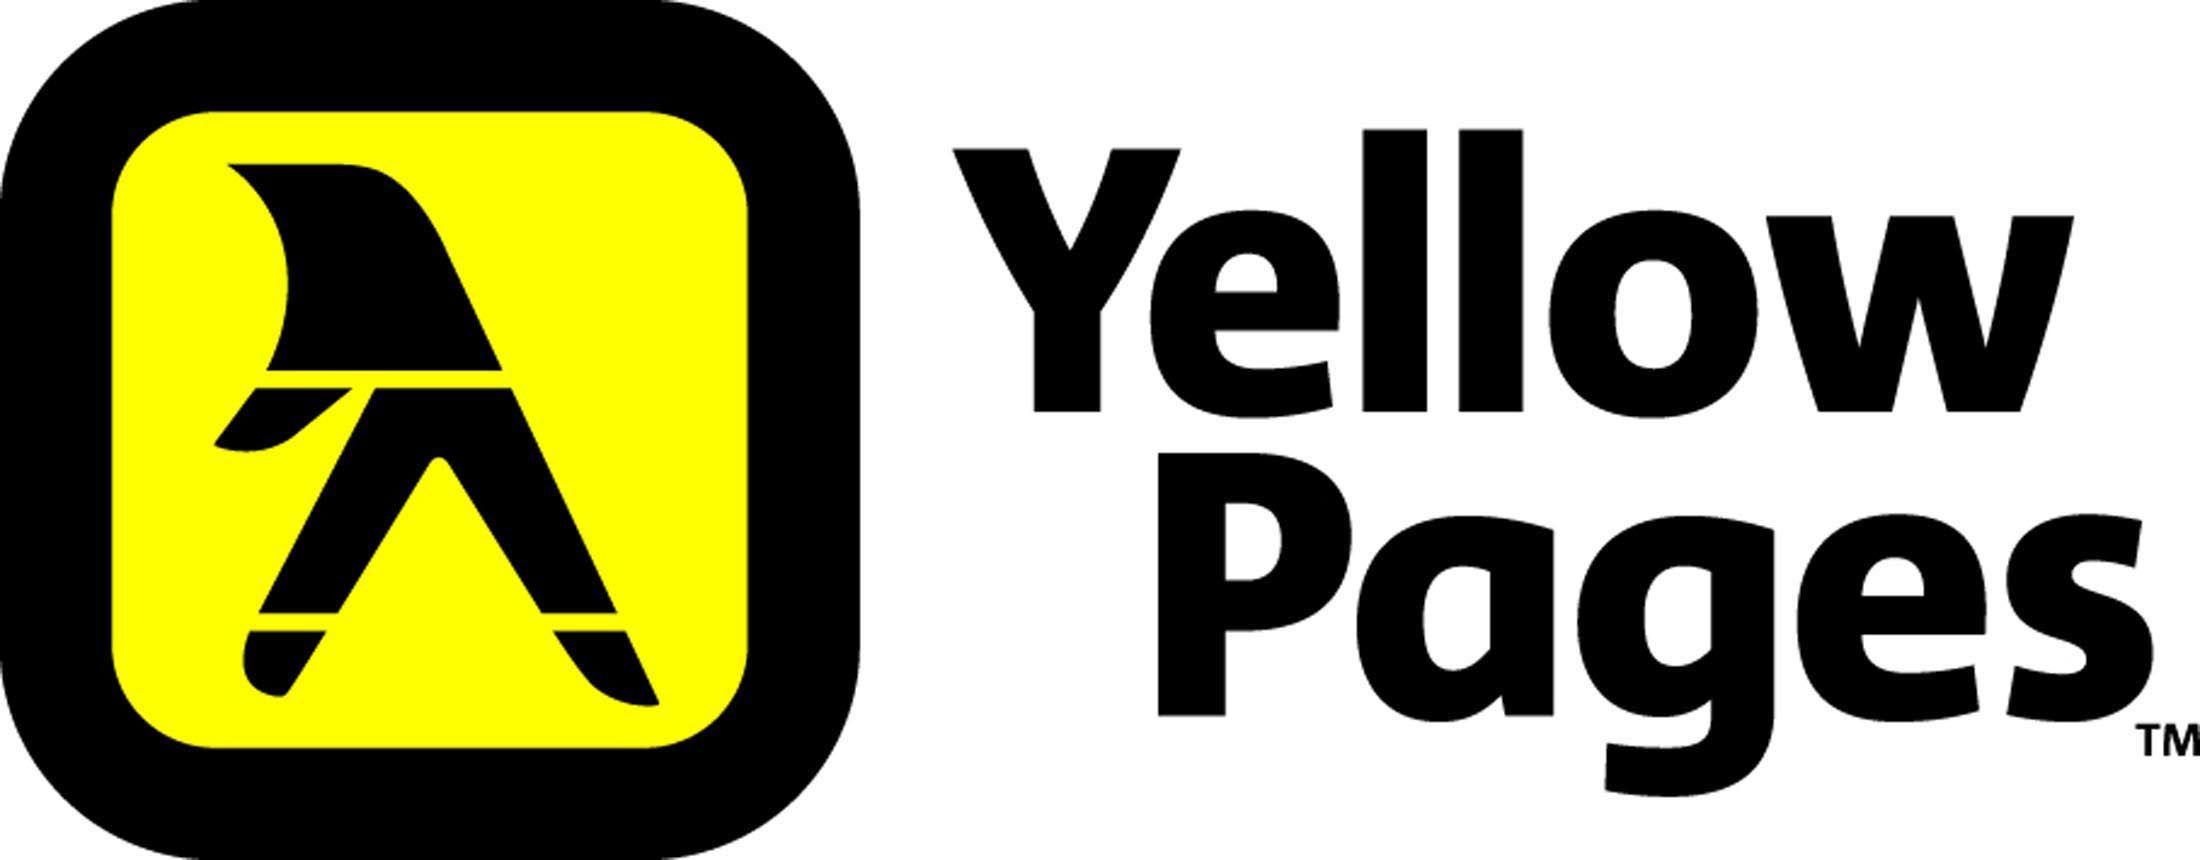 YP Yellow Pages Logo - 1. Visit yellowpages.com or yp.com 2. Search “PT Plus” and enter the ...